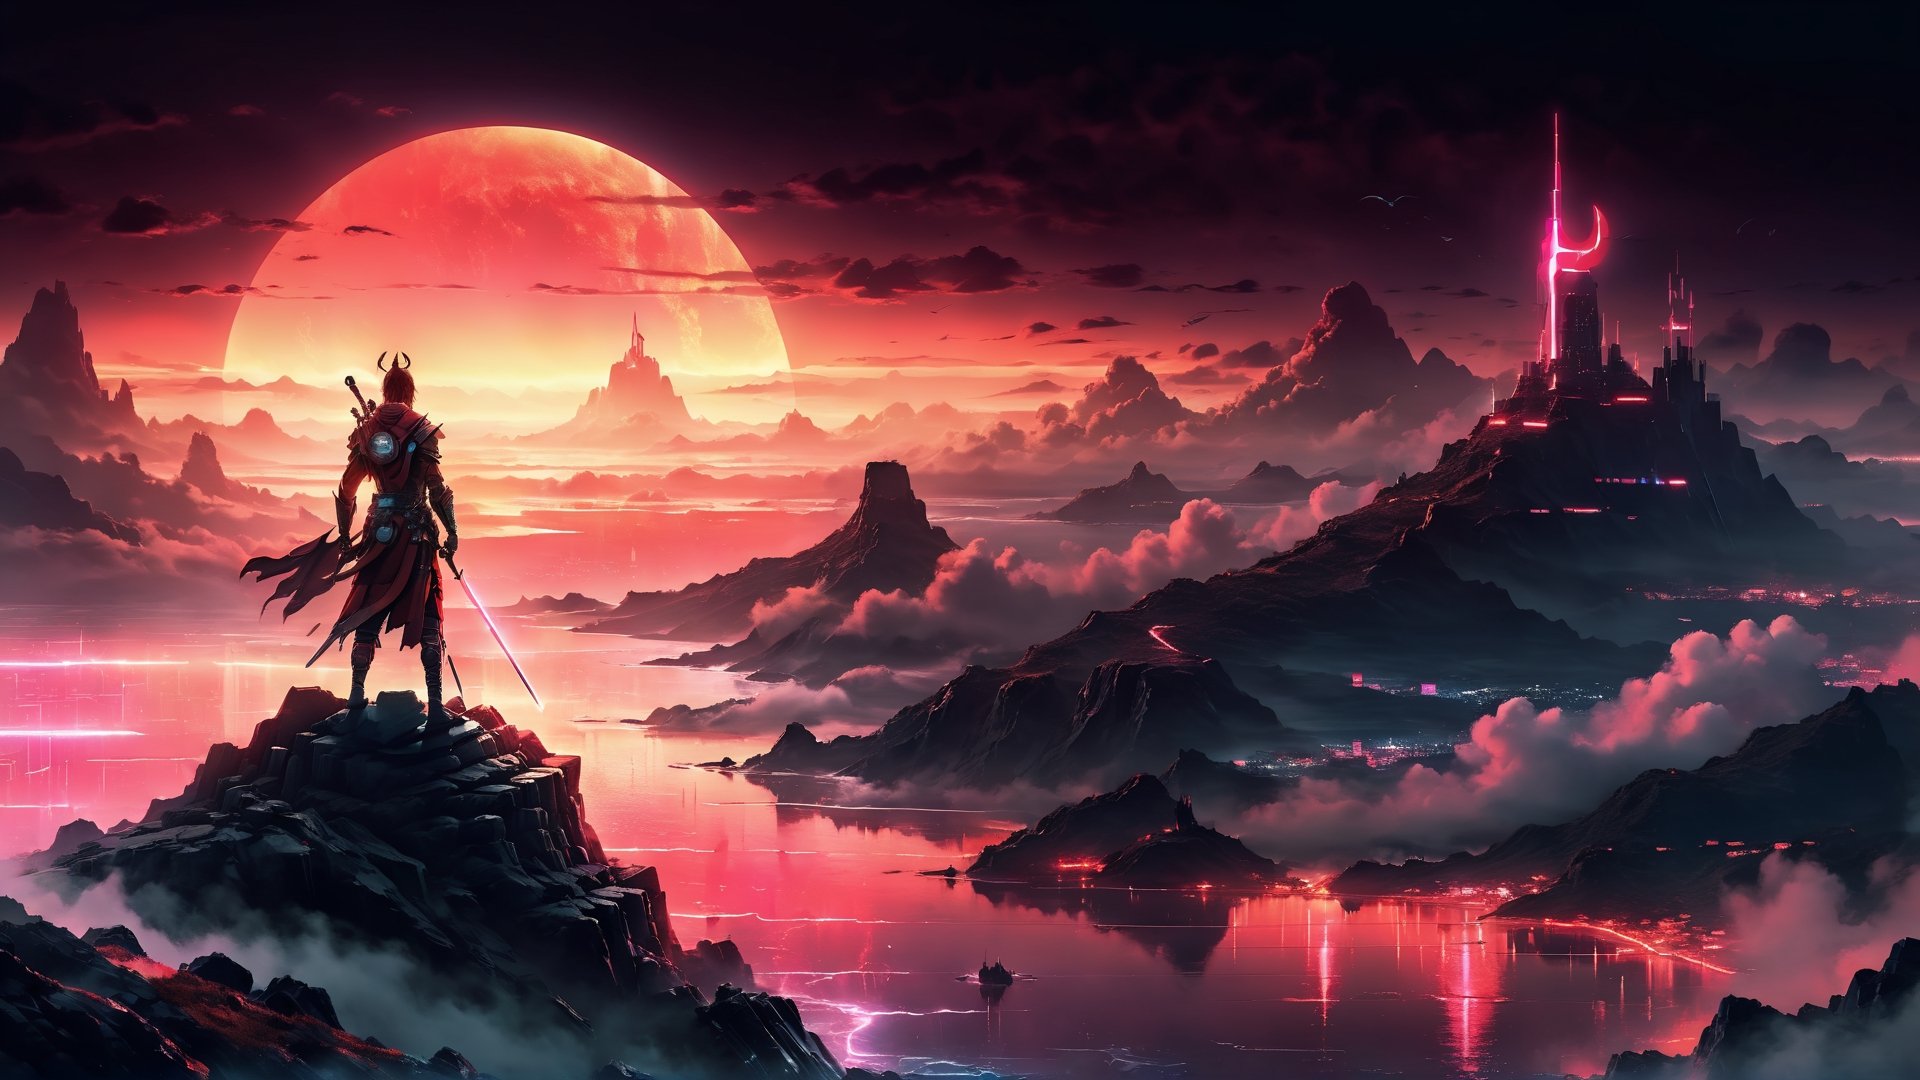 A Lone warrior on the top of the hill watching the ocean, red sunset sky, water reflections, neon lights, futuristic technology, mysterious fog, muffled silence